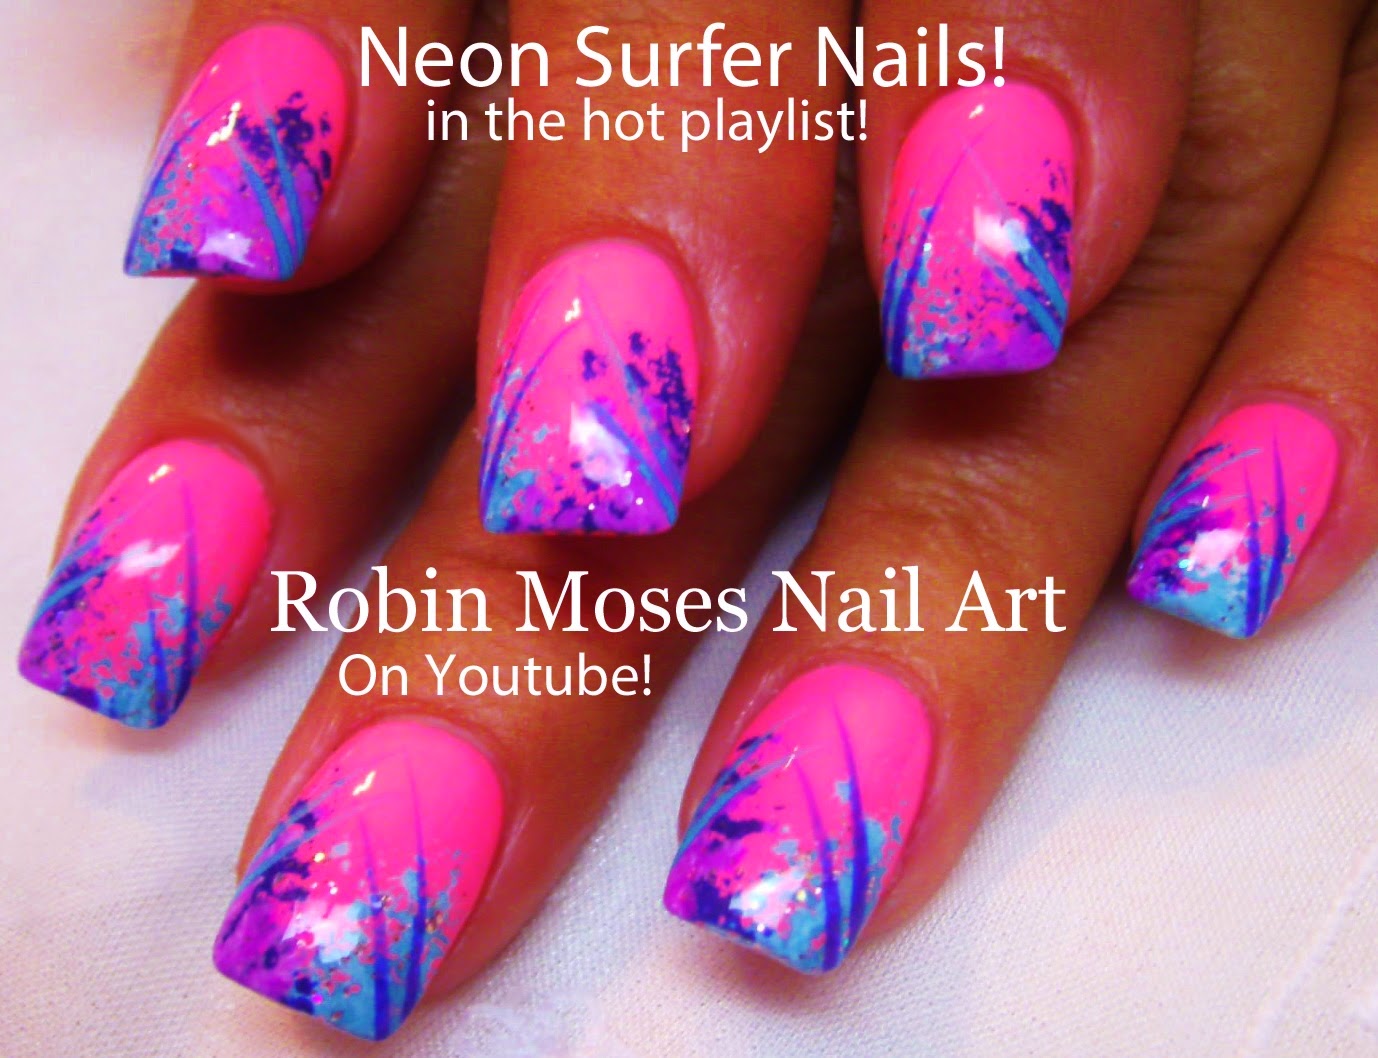 Neon Striped Nail Art: How to Incorporate Different Colors and Patterns - wide 11